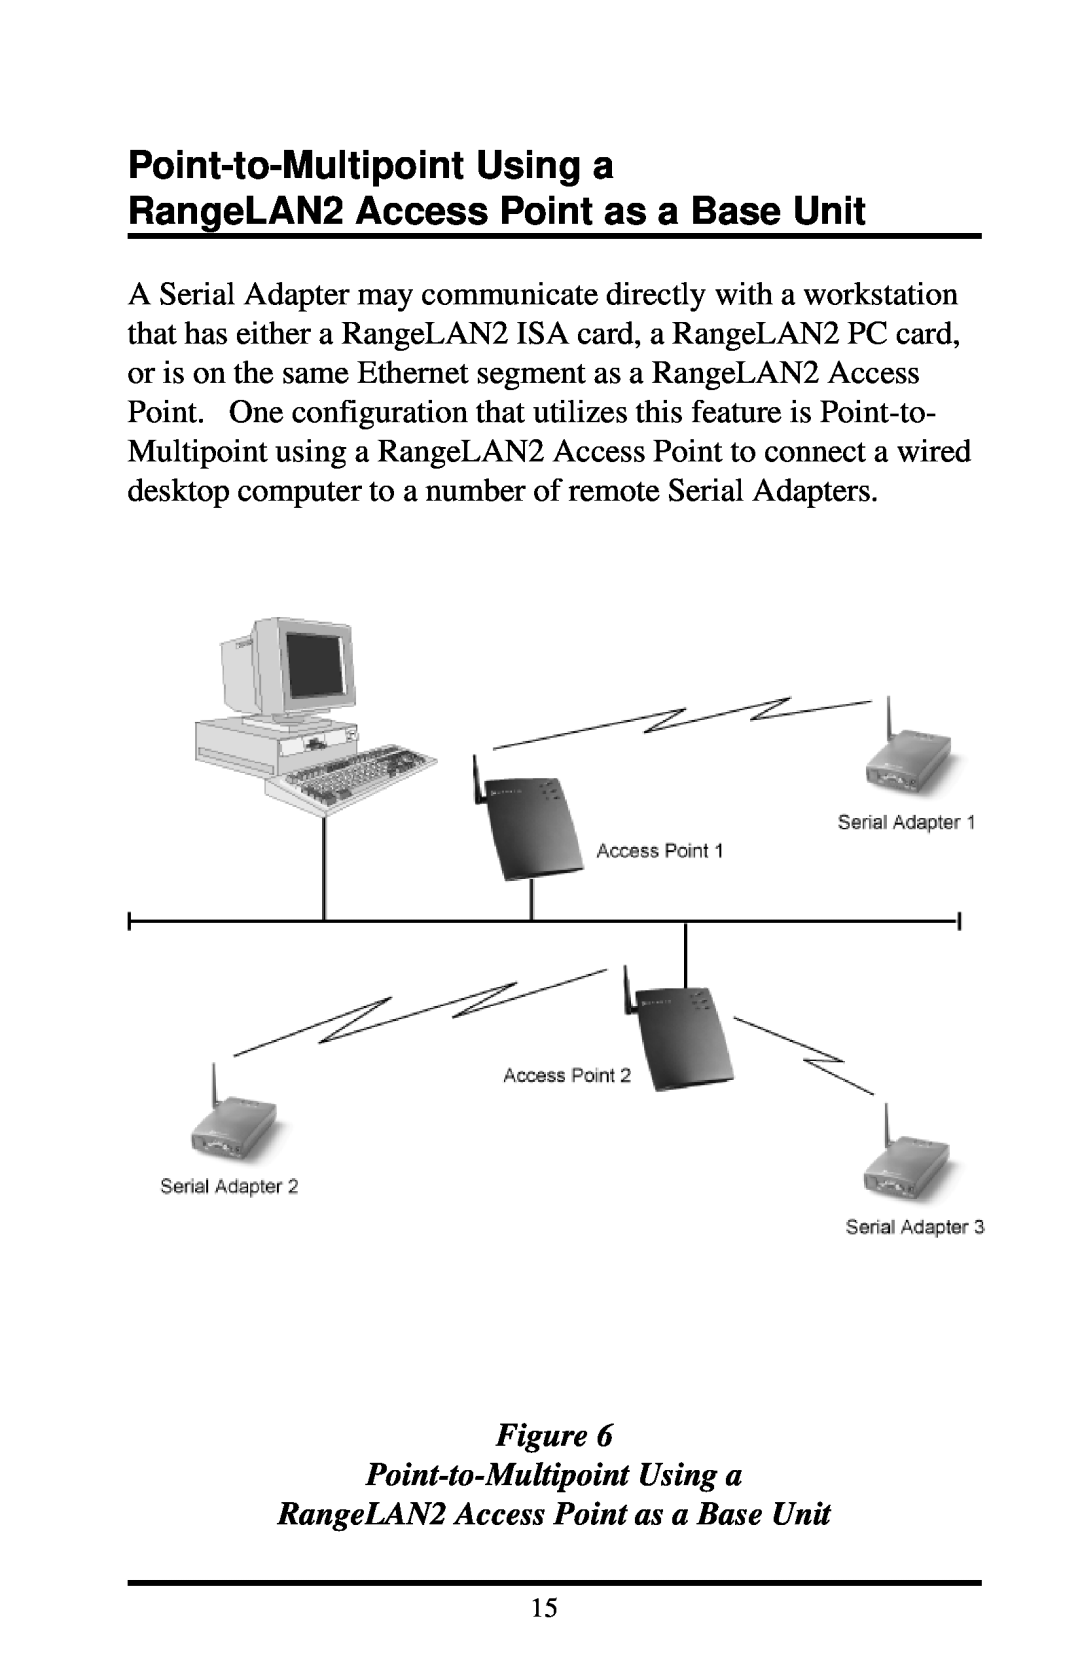 Proxima ASA 7911, 7910 manual Point-to-Multipoint Using a RangeLAN2 Access Point as a Base Unit 